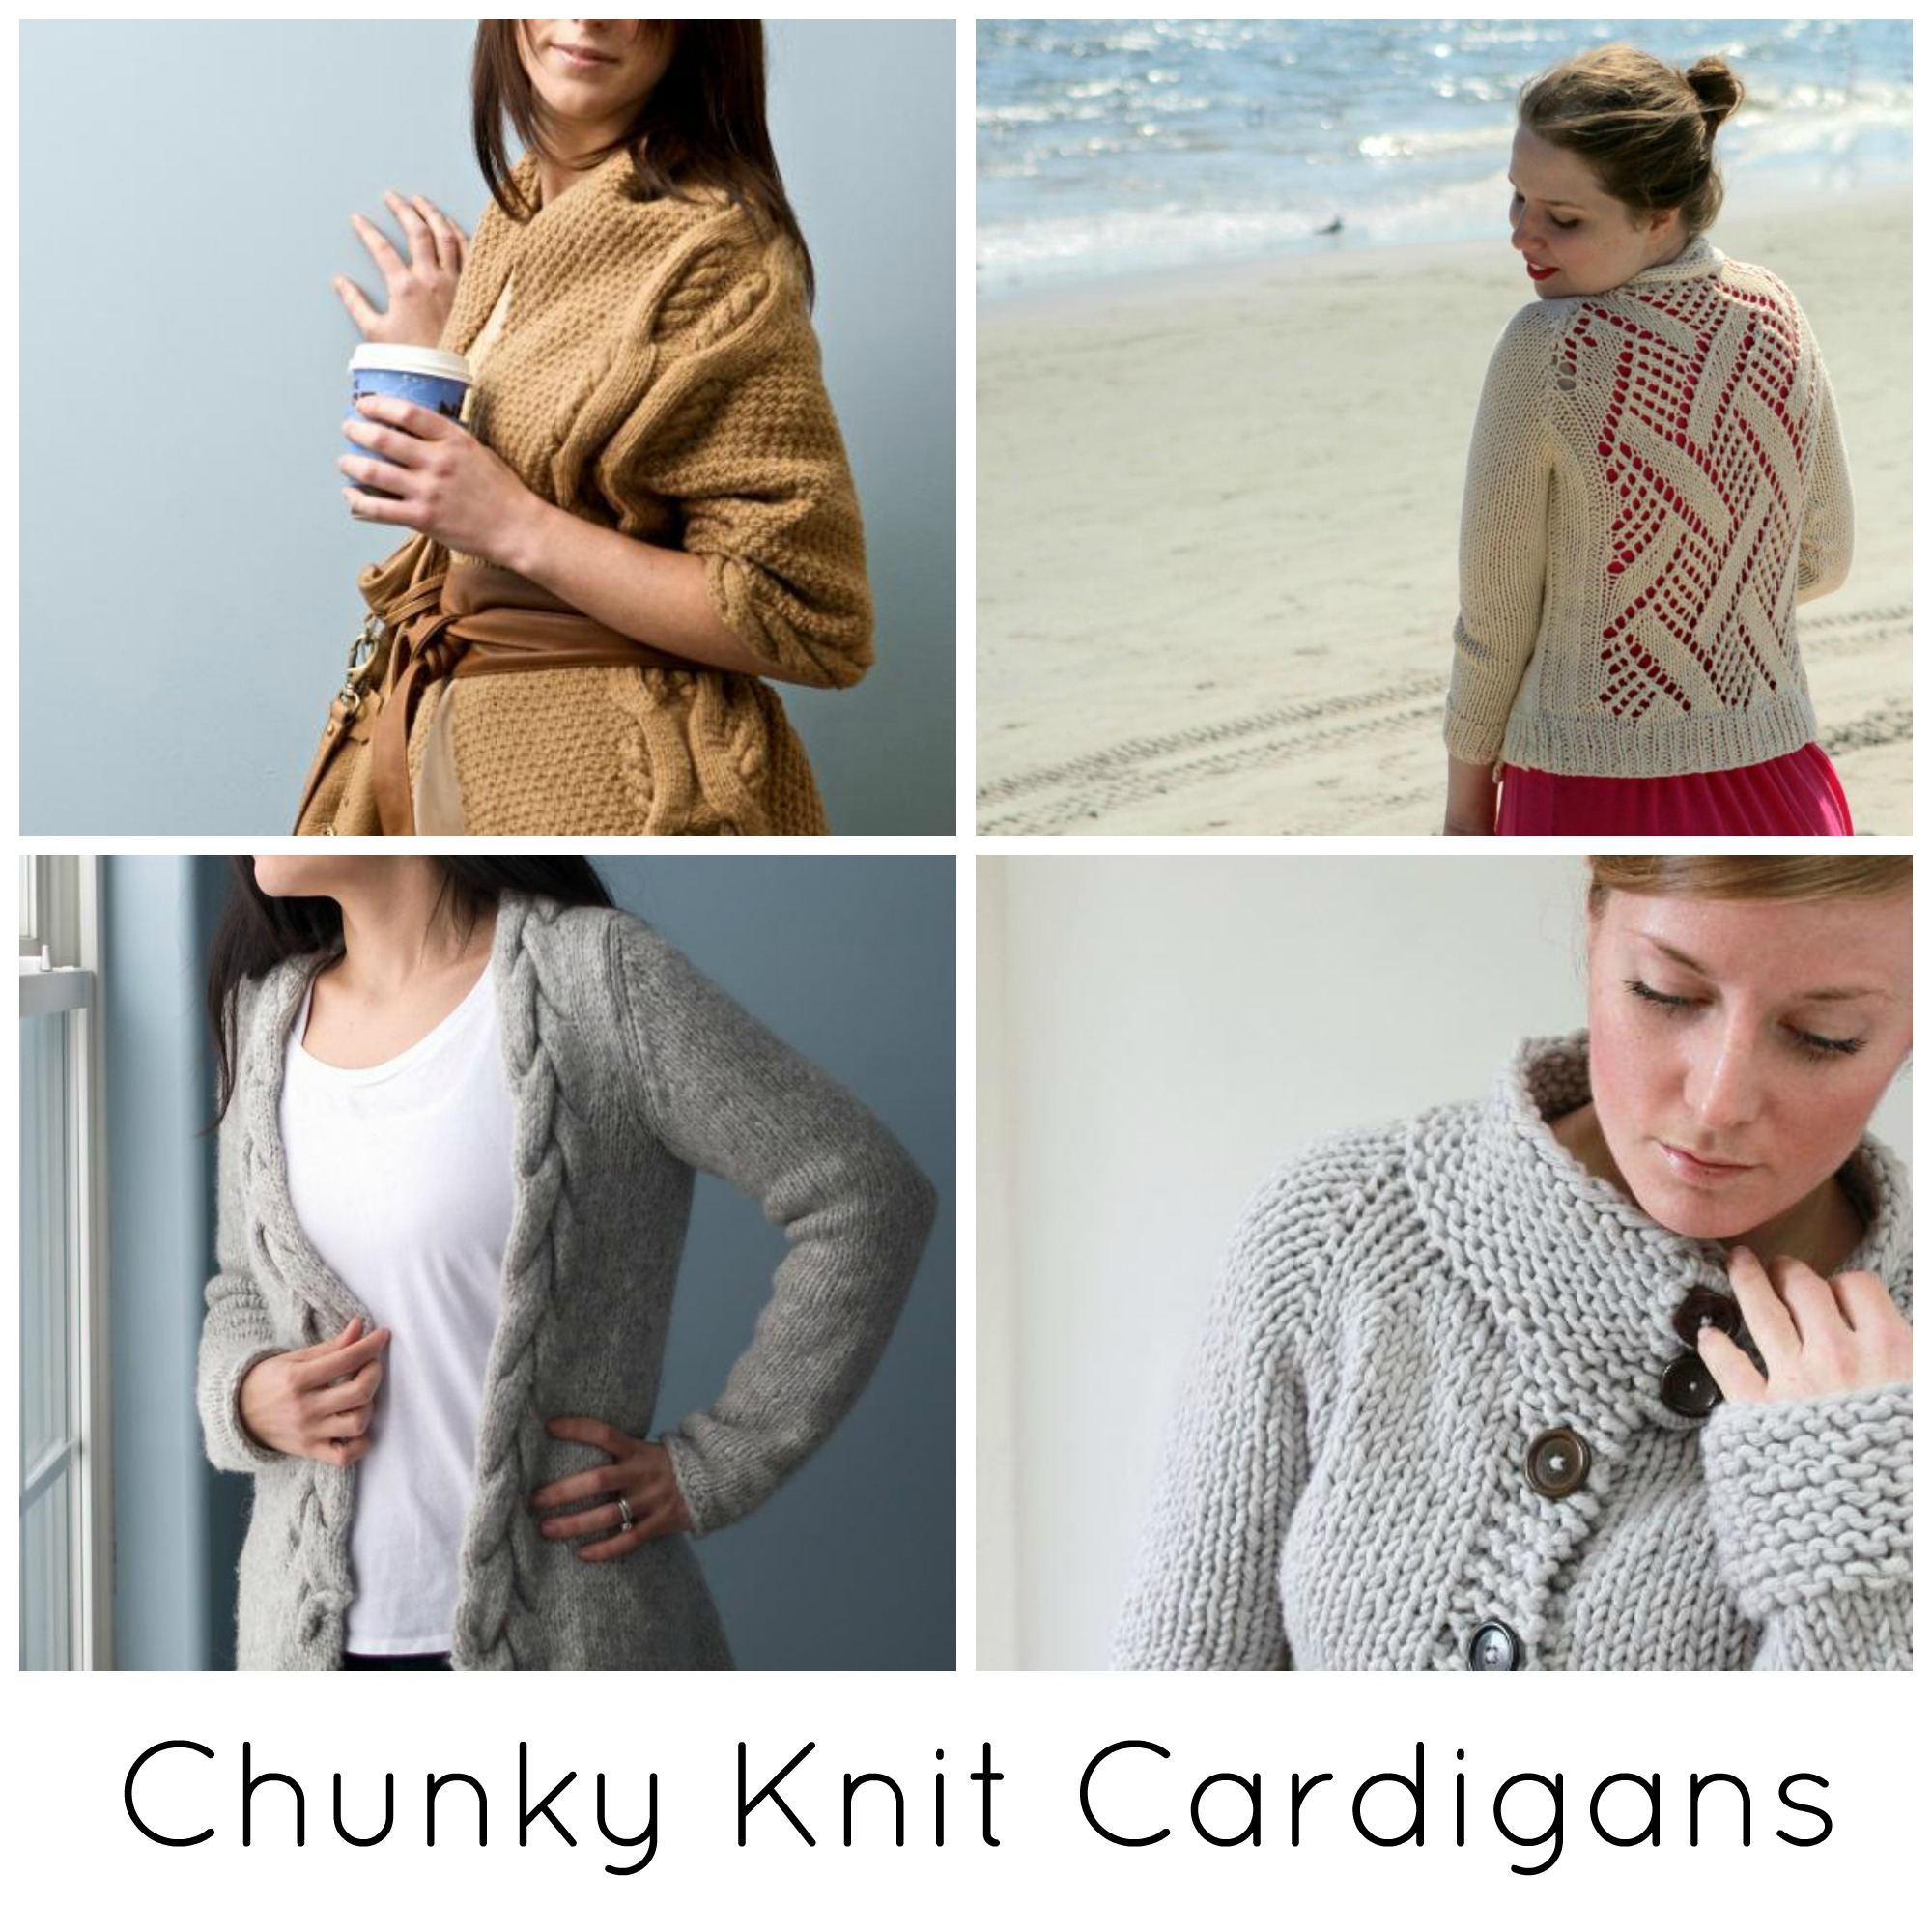 Knitted Jacket Patterns Free The Coziest Chunky Knit Cardigan Patterns Ever